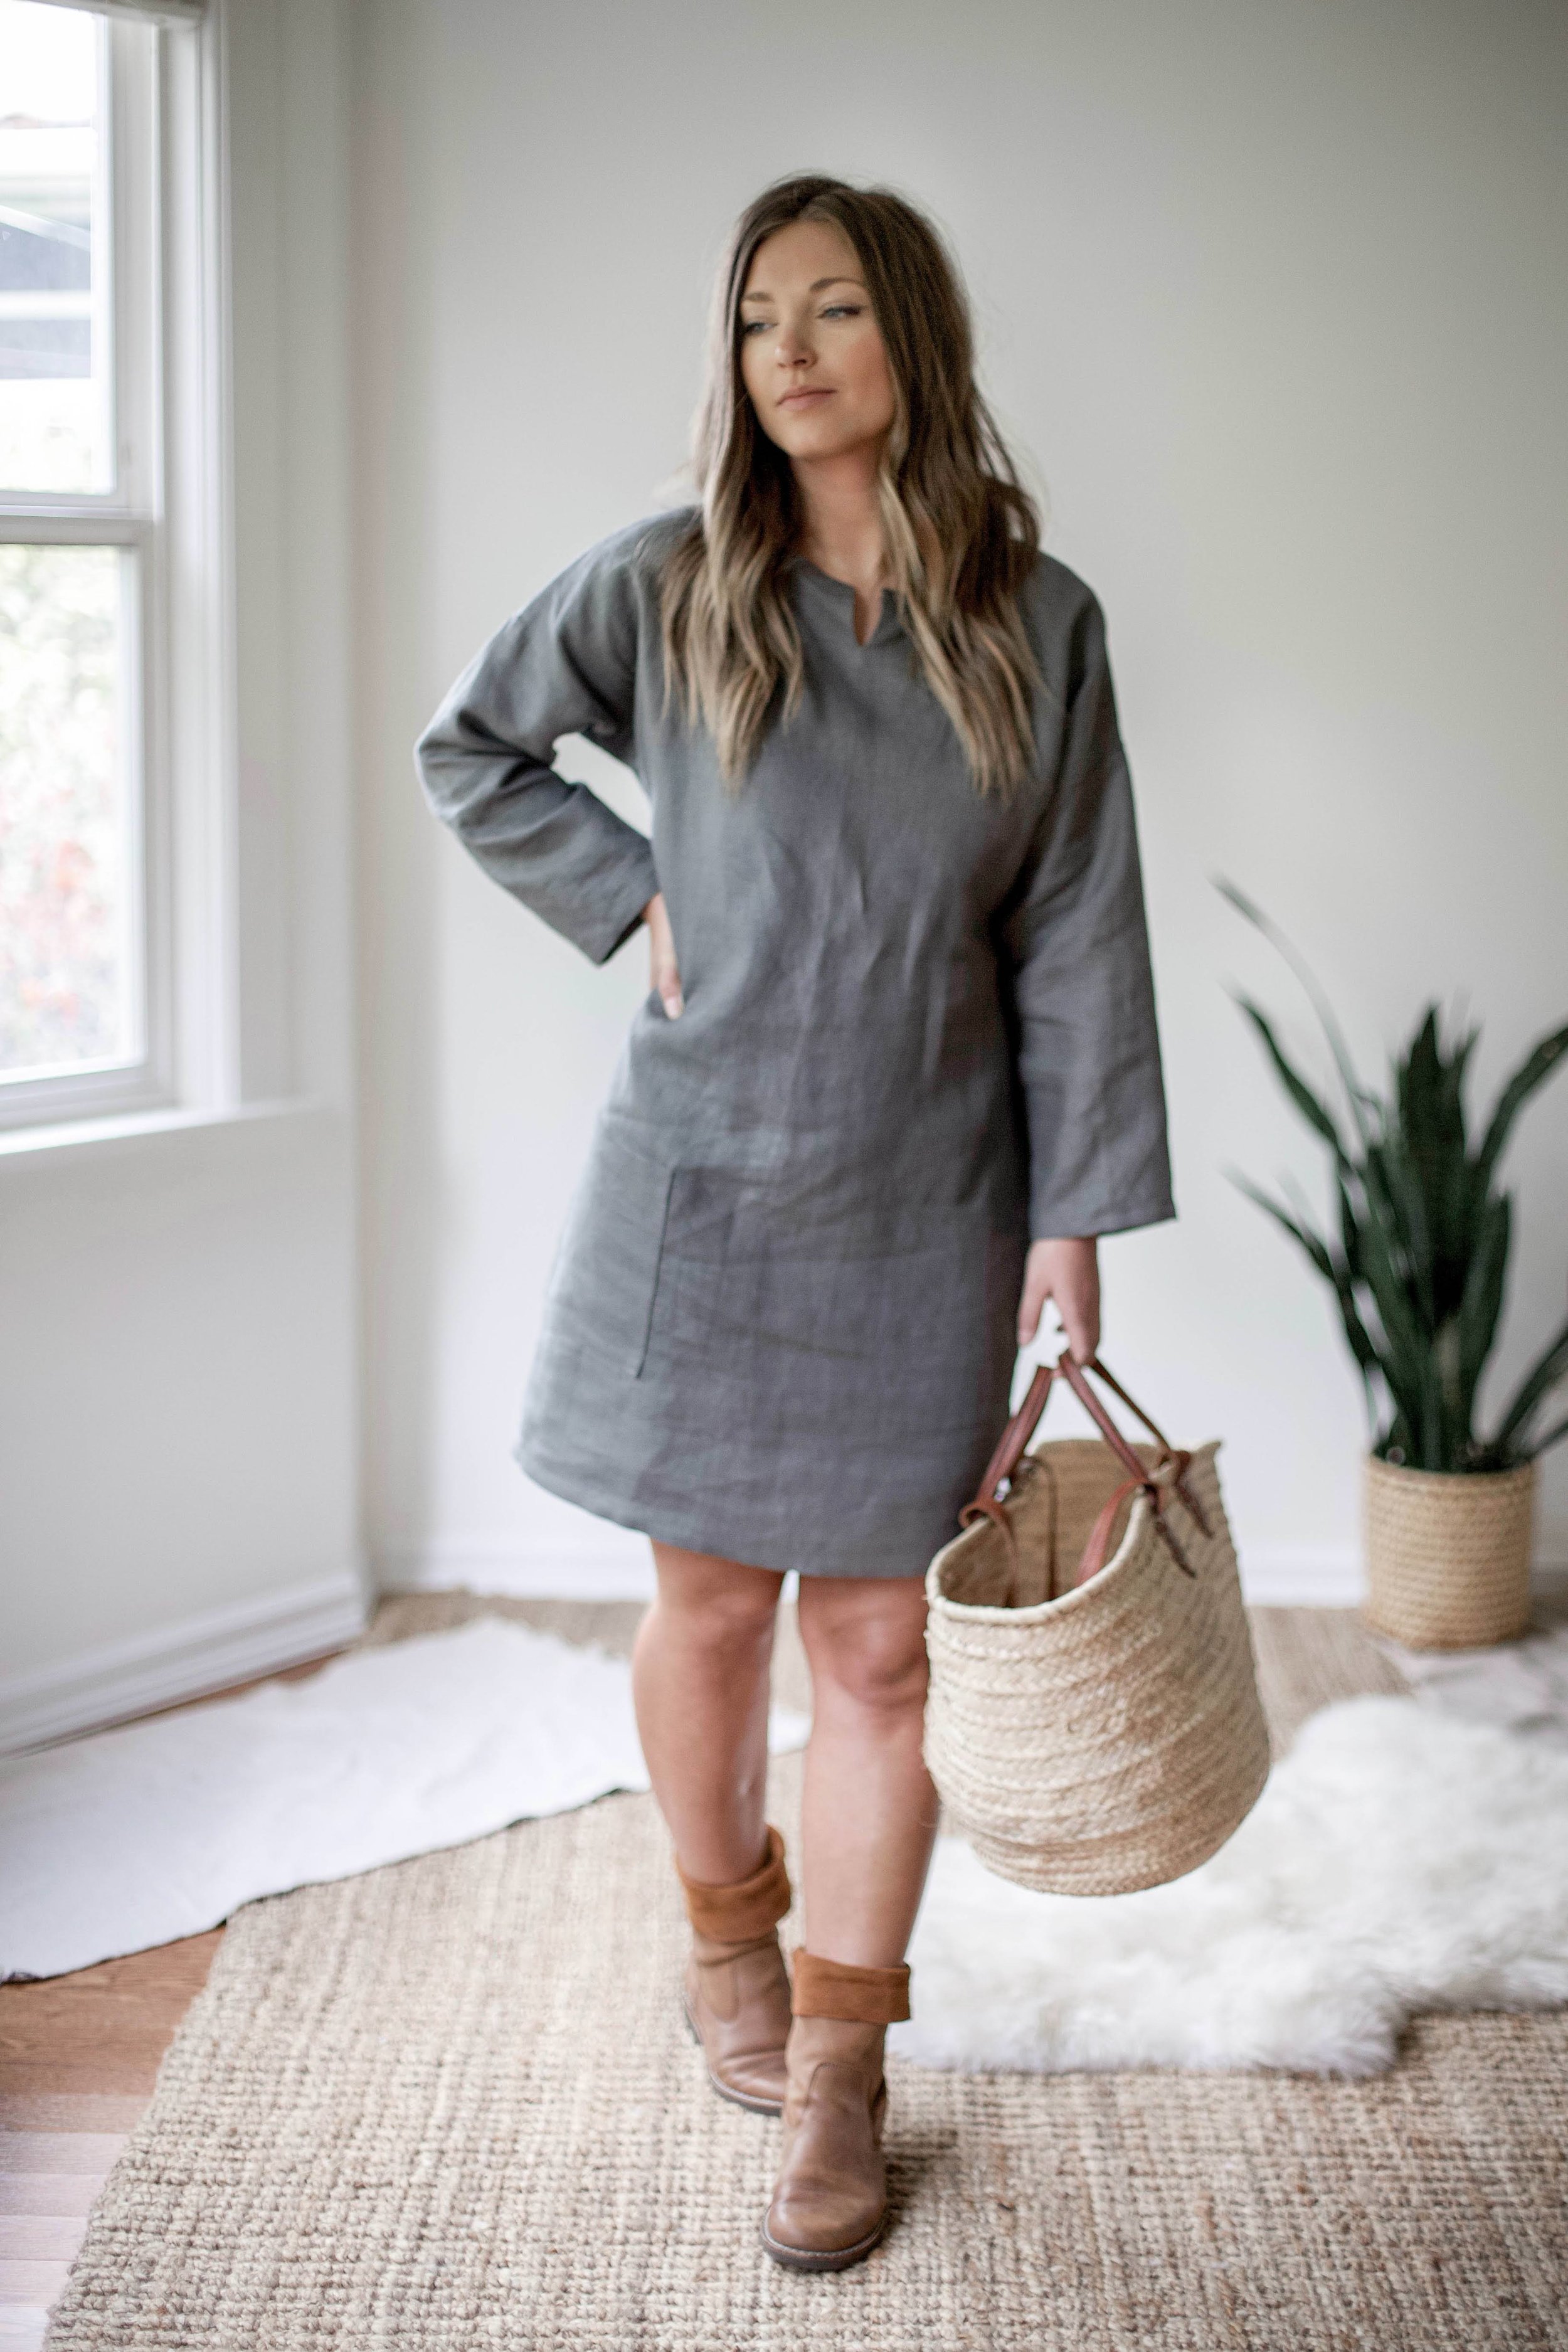 nomi-designs_ali-dress_forest-colored-natural-linen-dress-with-pockets_front-styled-with-boots-and-market-bag copy.jpg